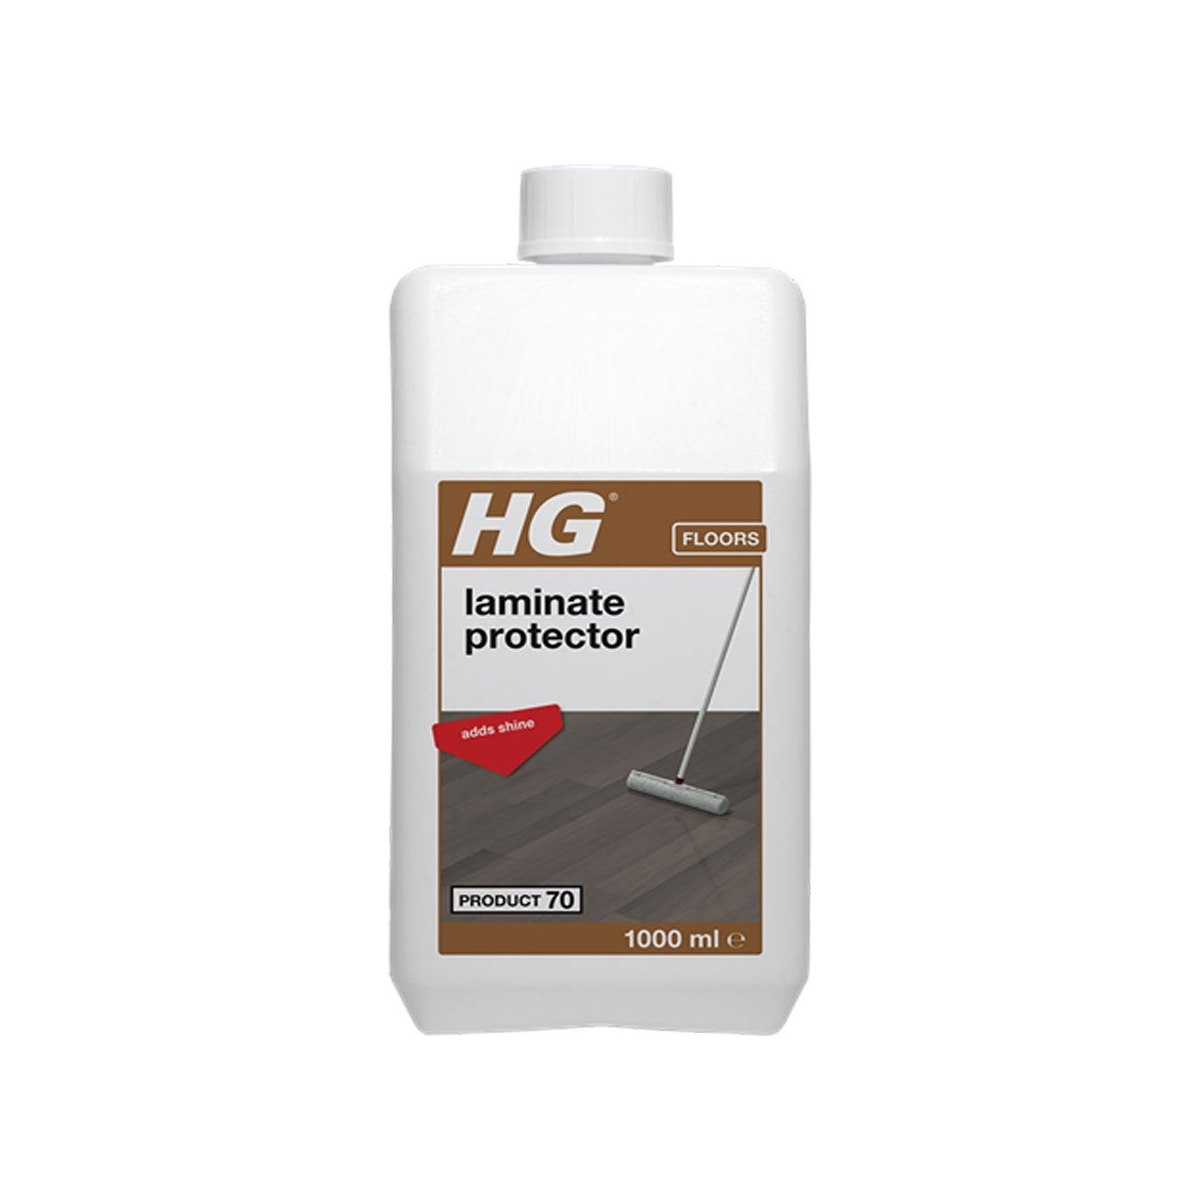 HG Laminate Protector 1 Litre Product 70